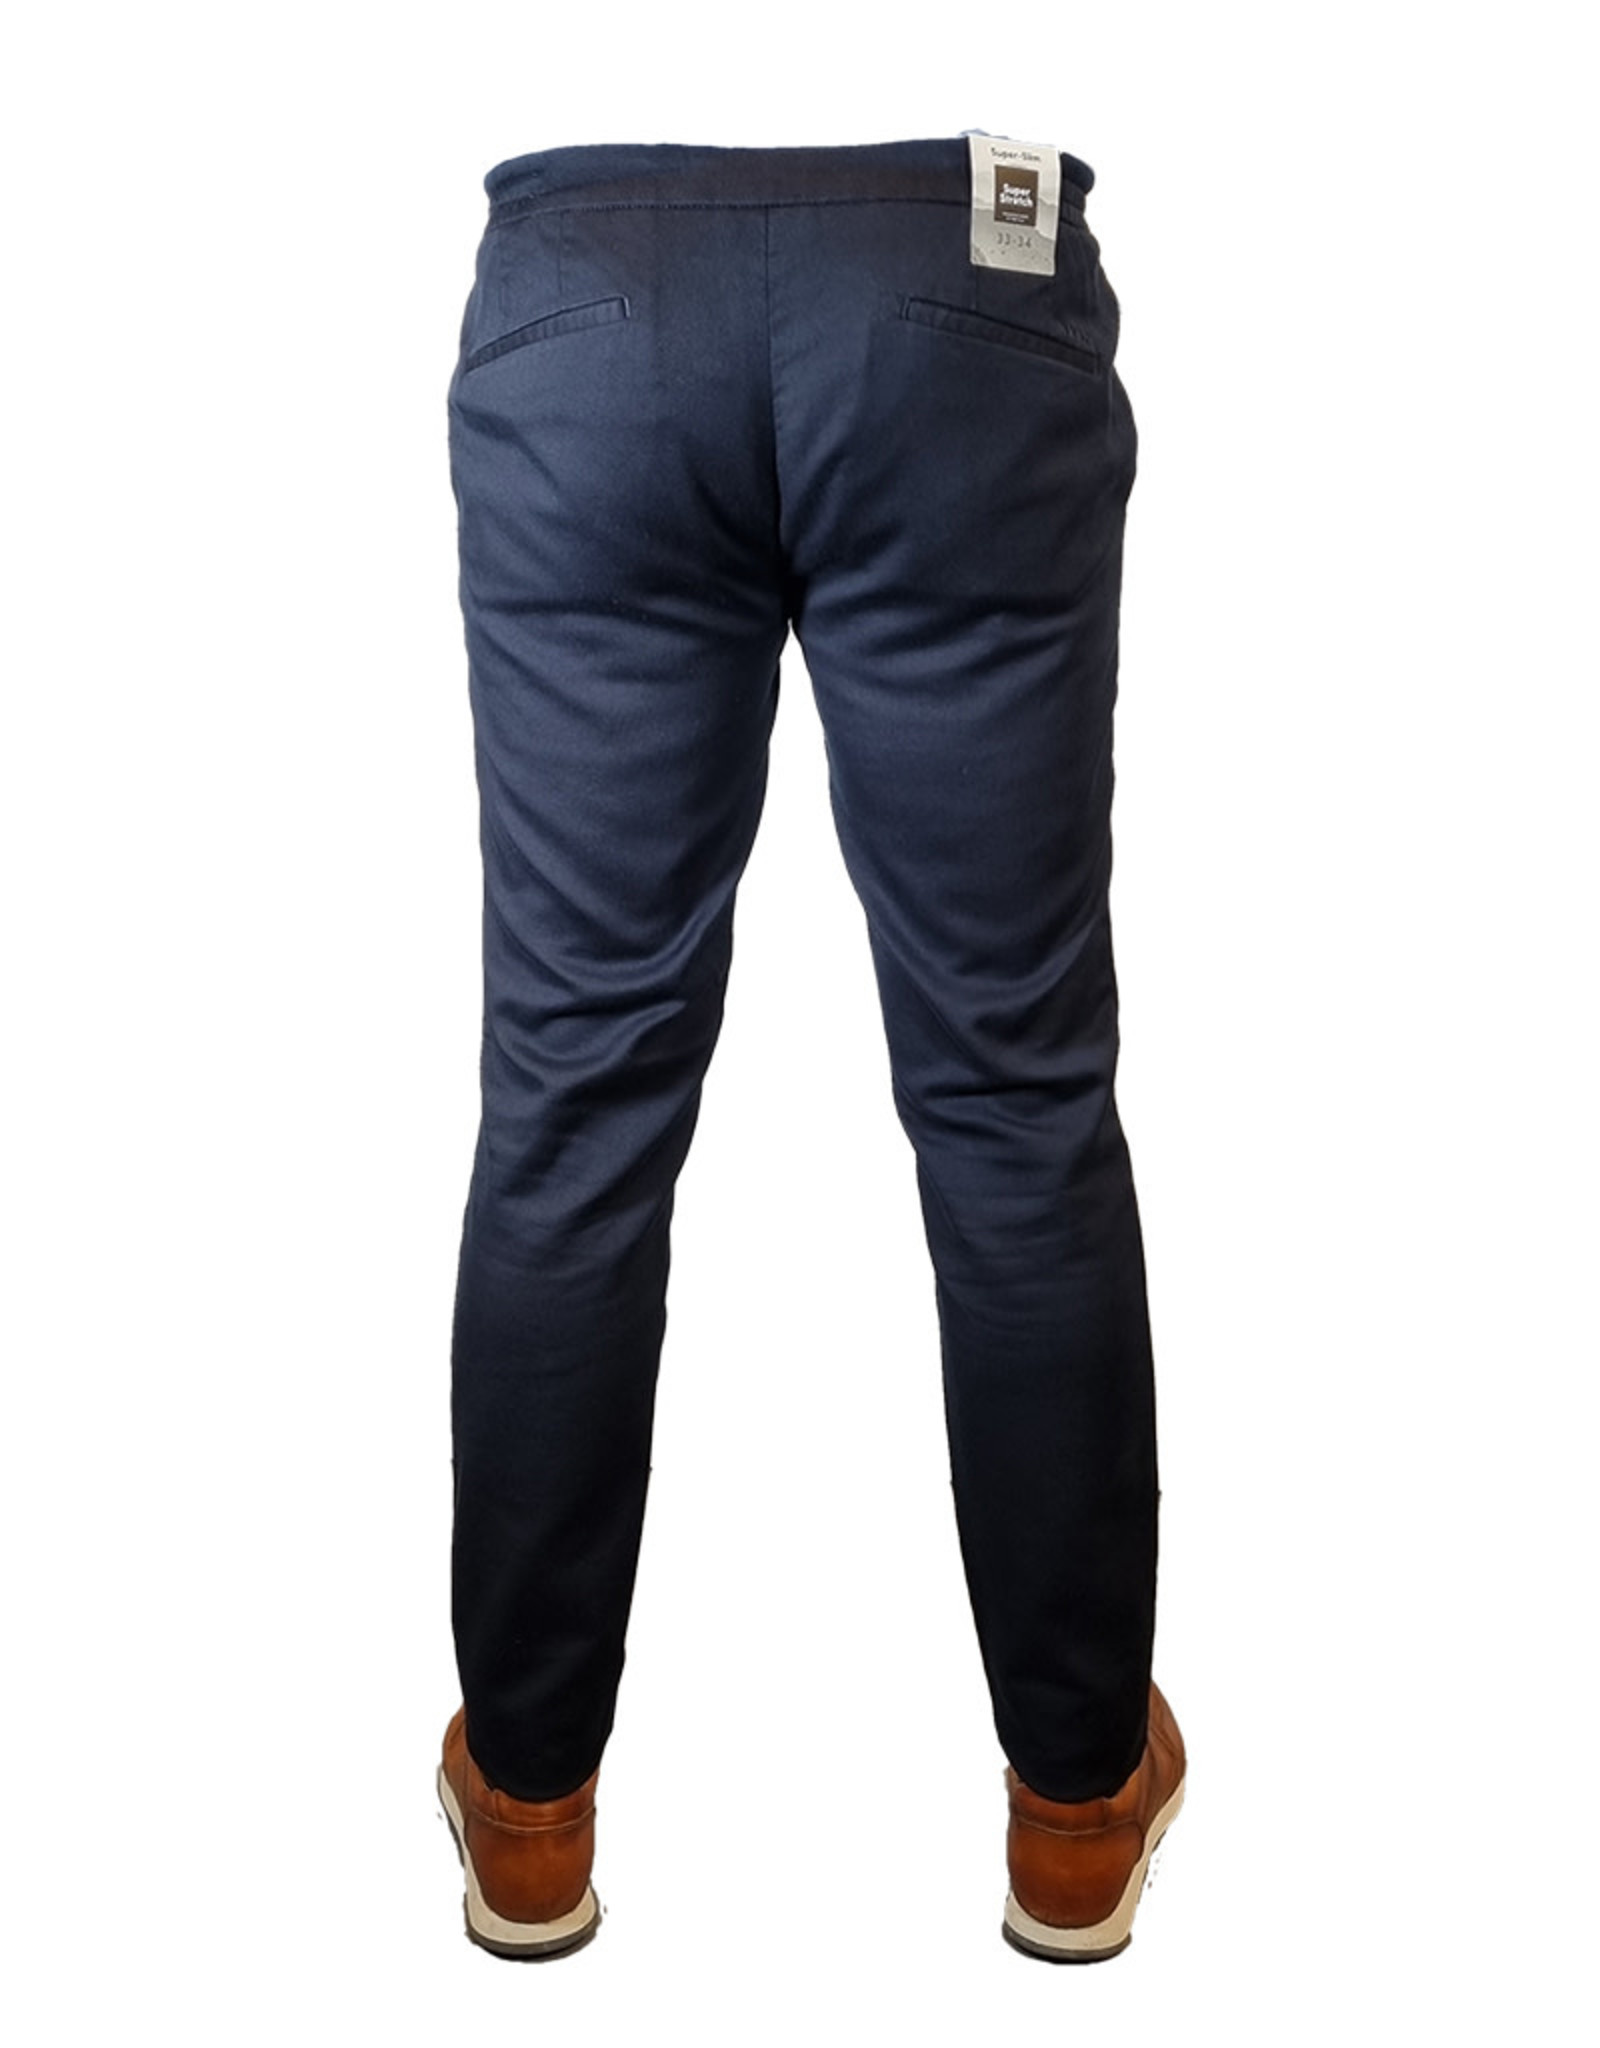 MMX MMX trousers cotton blue Olympia 7614/19